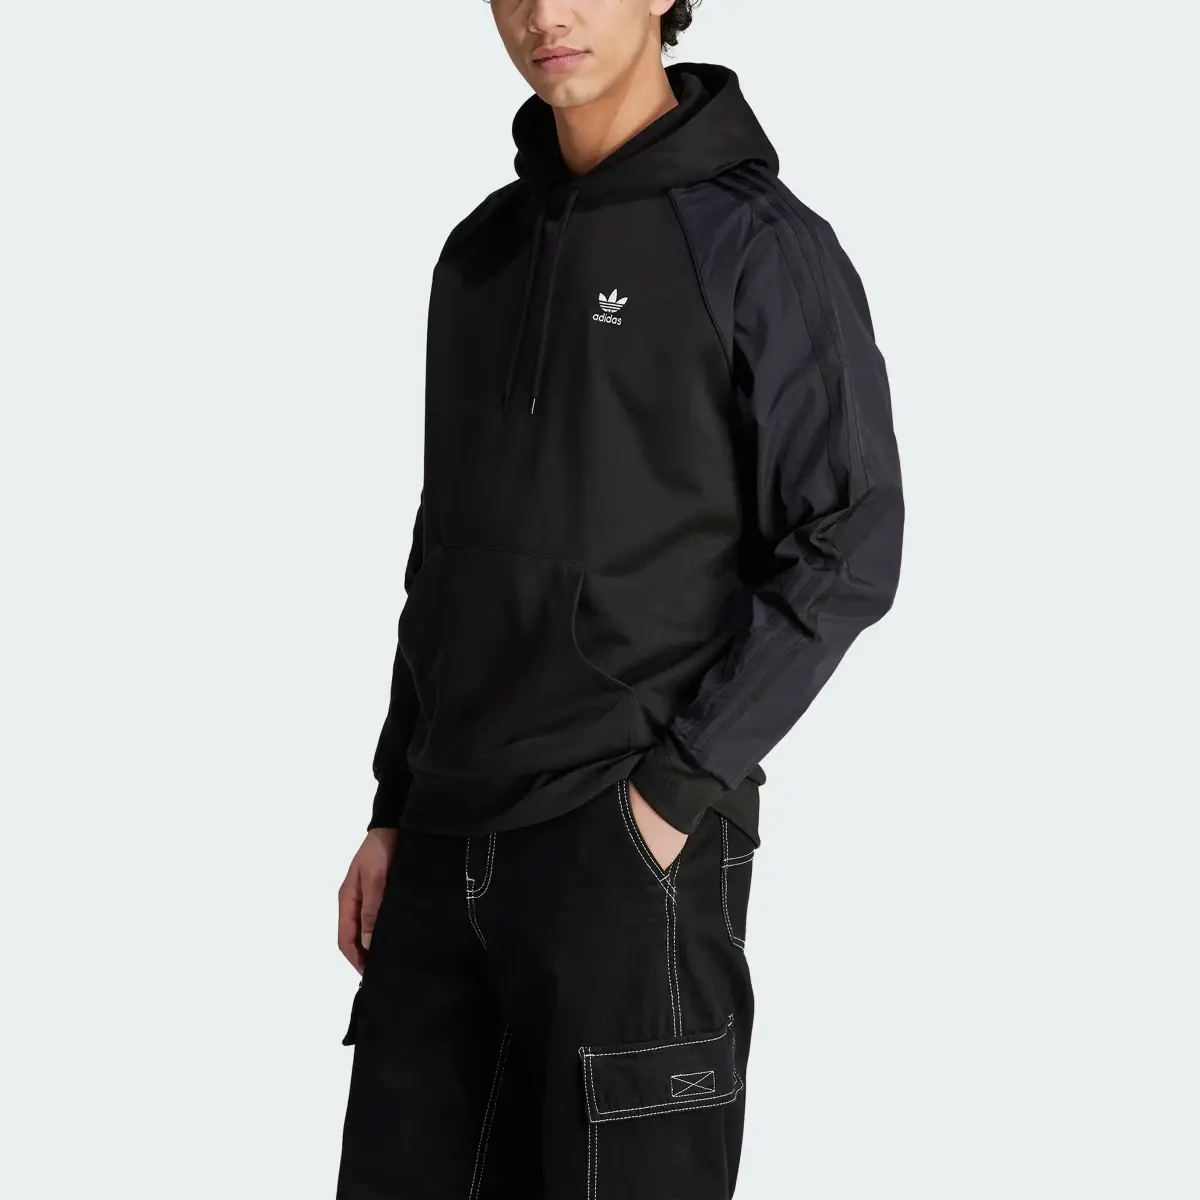 Adidas Adicolor Re-Pro SST Material Mix Hoodie. 1